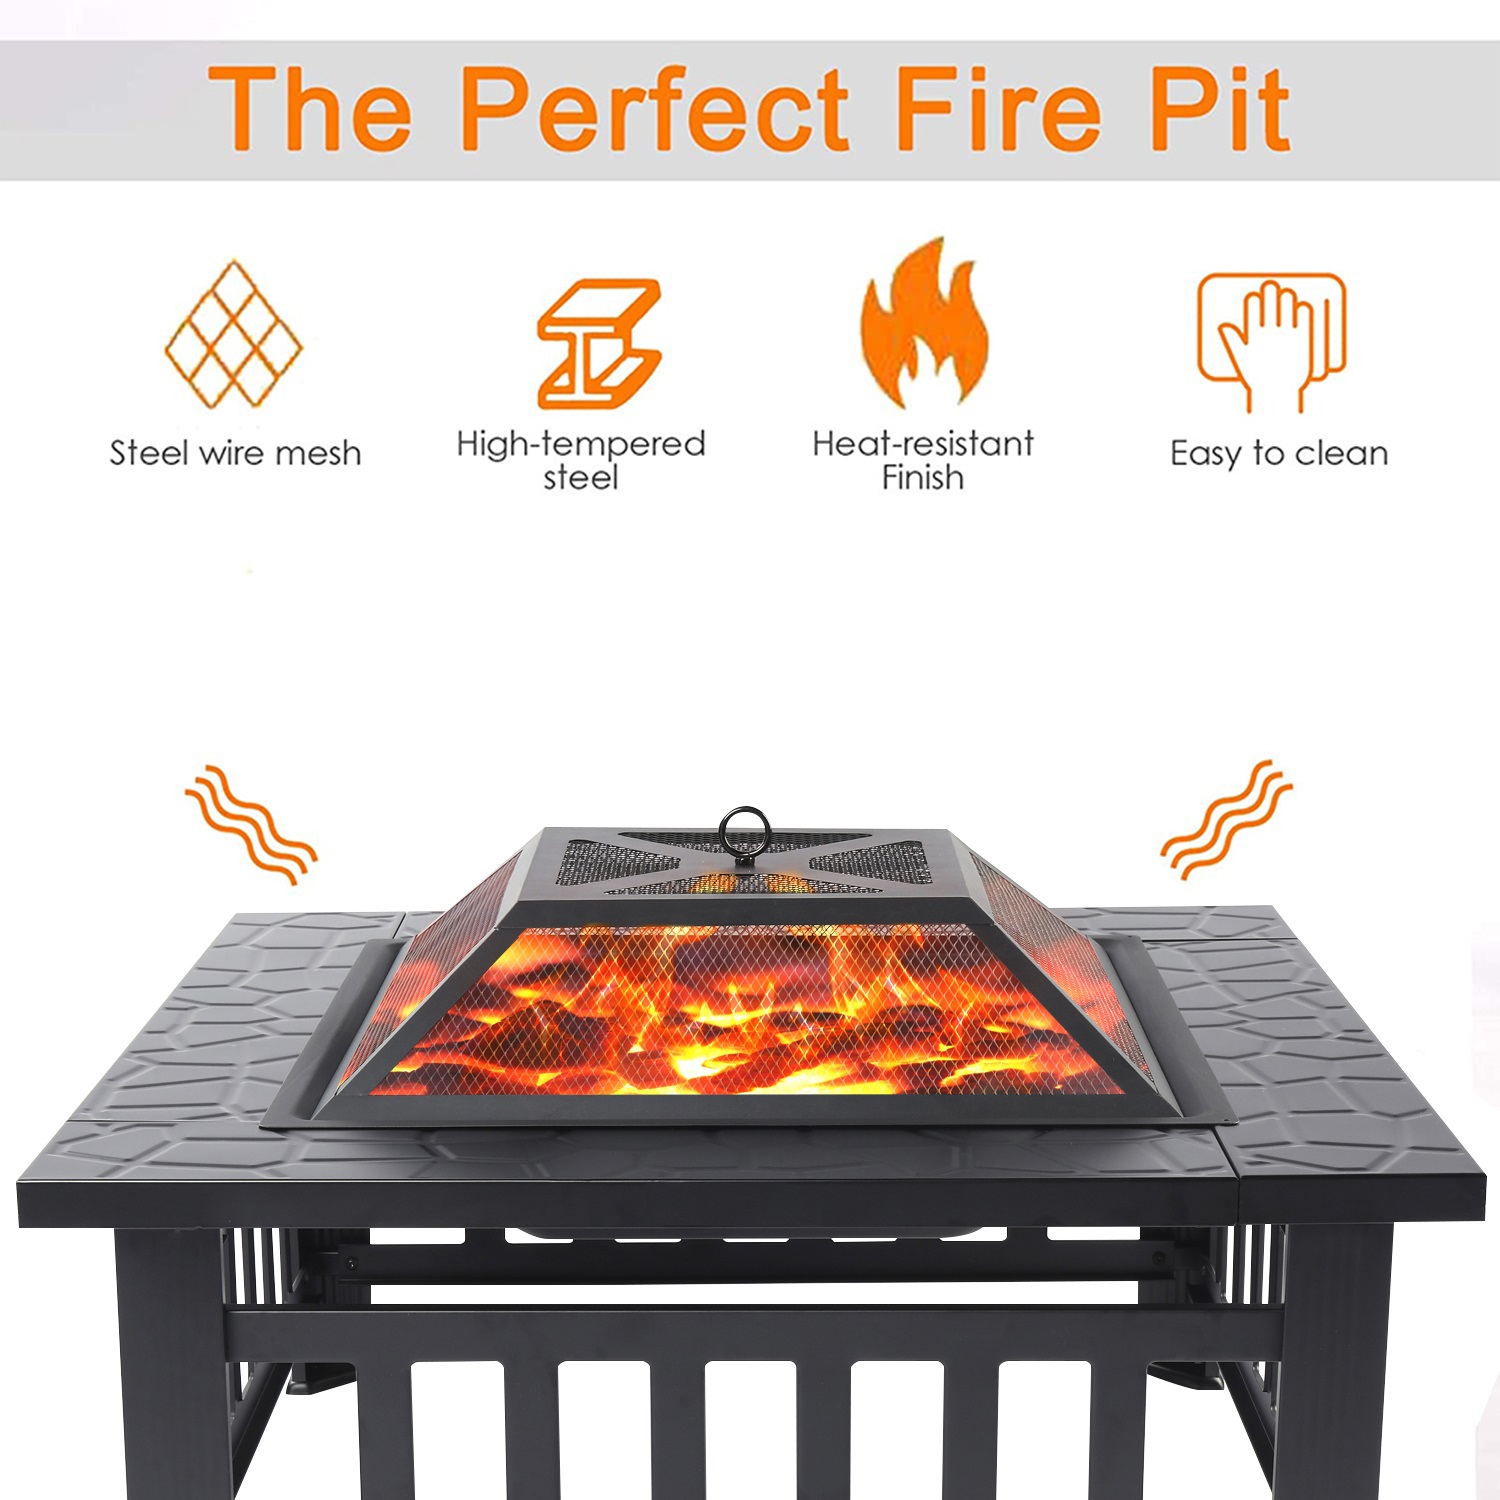 Outdoor 31.3" Wood Burning Fire Pit, Premium Square Steel Fire Pit w/Mesh Screen Lid, Fire Pit Fireplace, Wood Burning Fireplace Ice Pit for Outdoor Backyard Patio Garden BBQ Grill, Black, S7046 - image 5 of 9